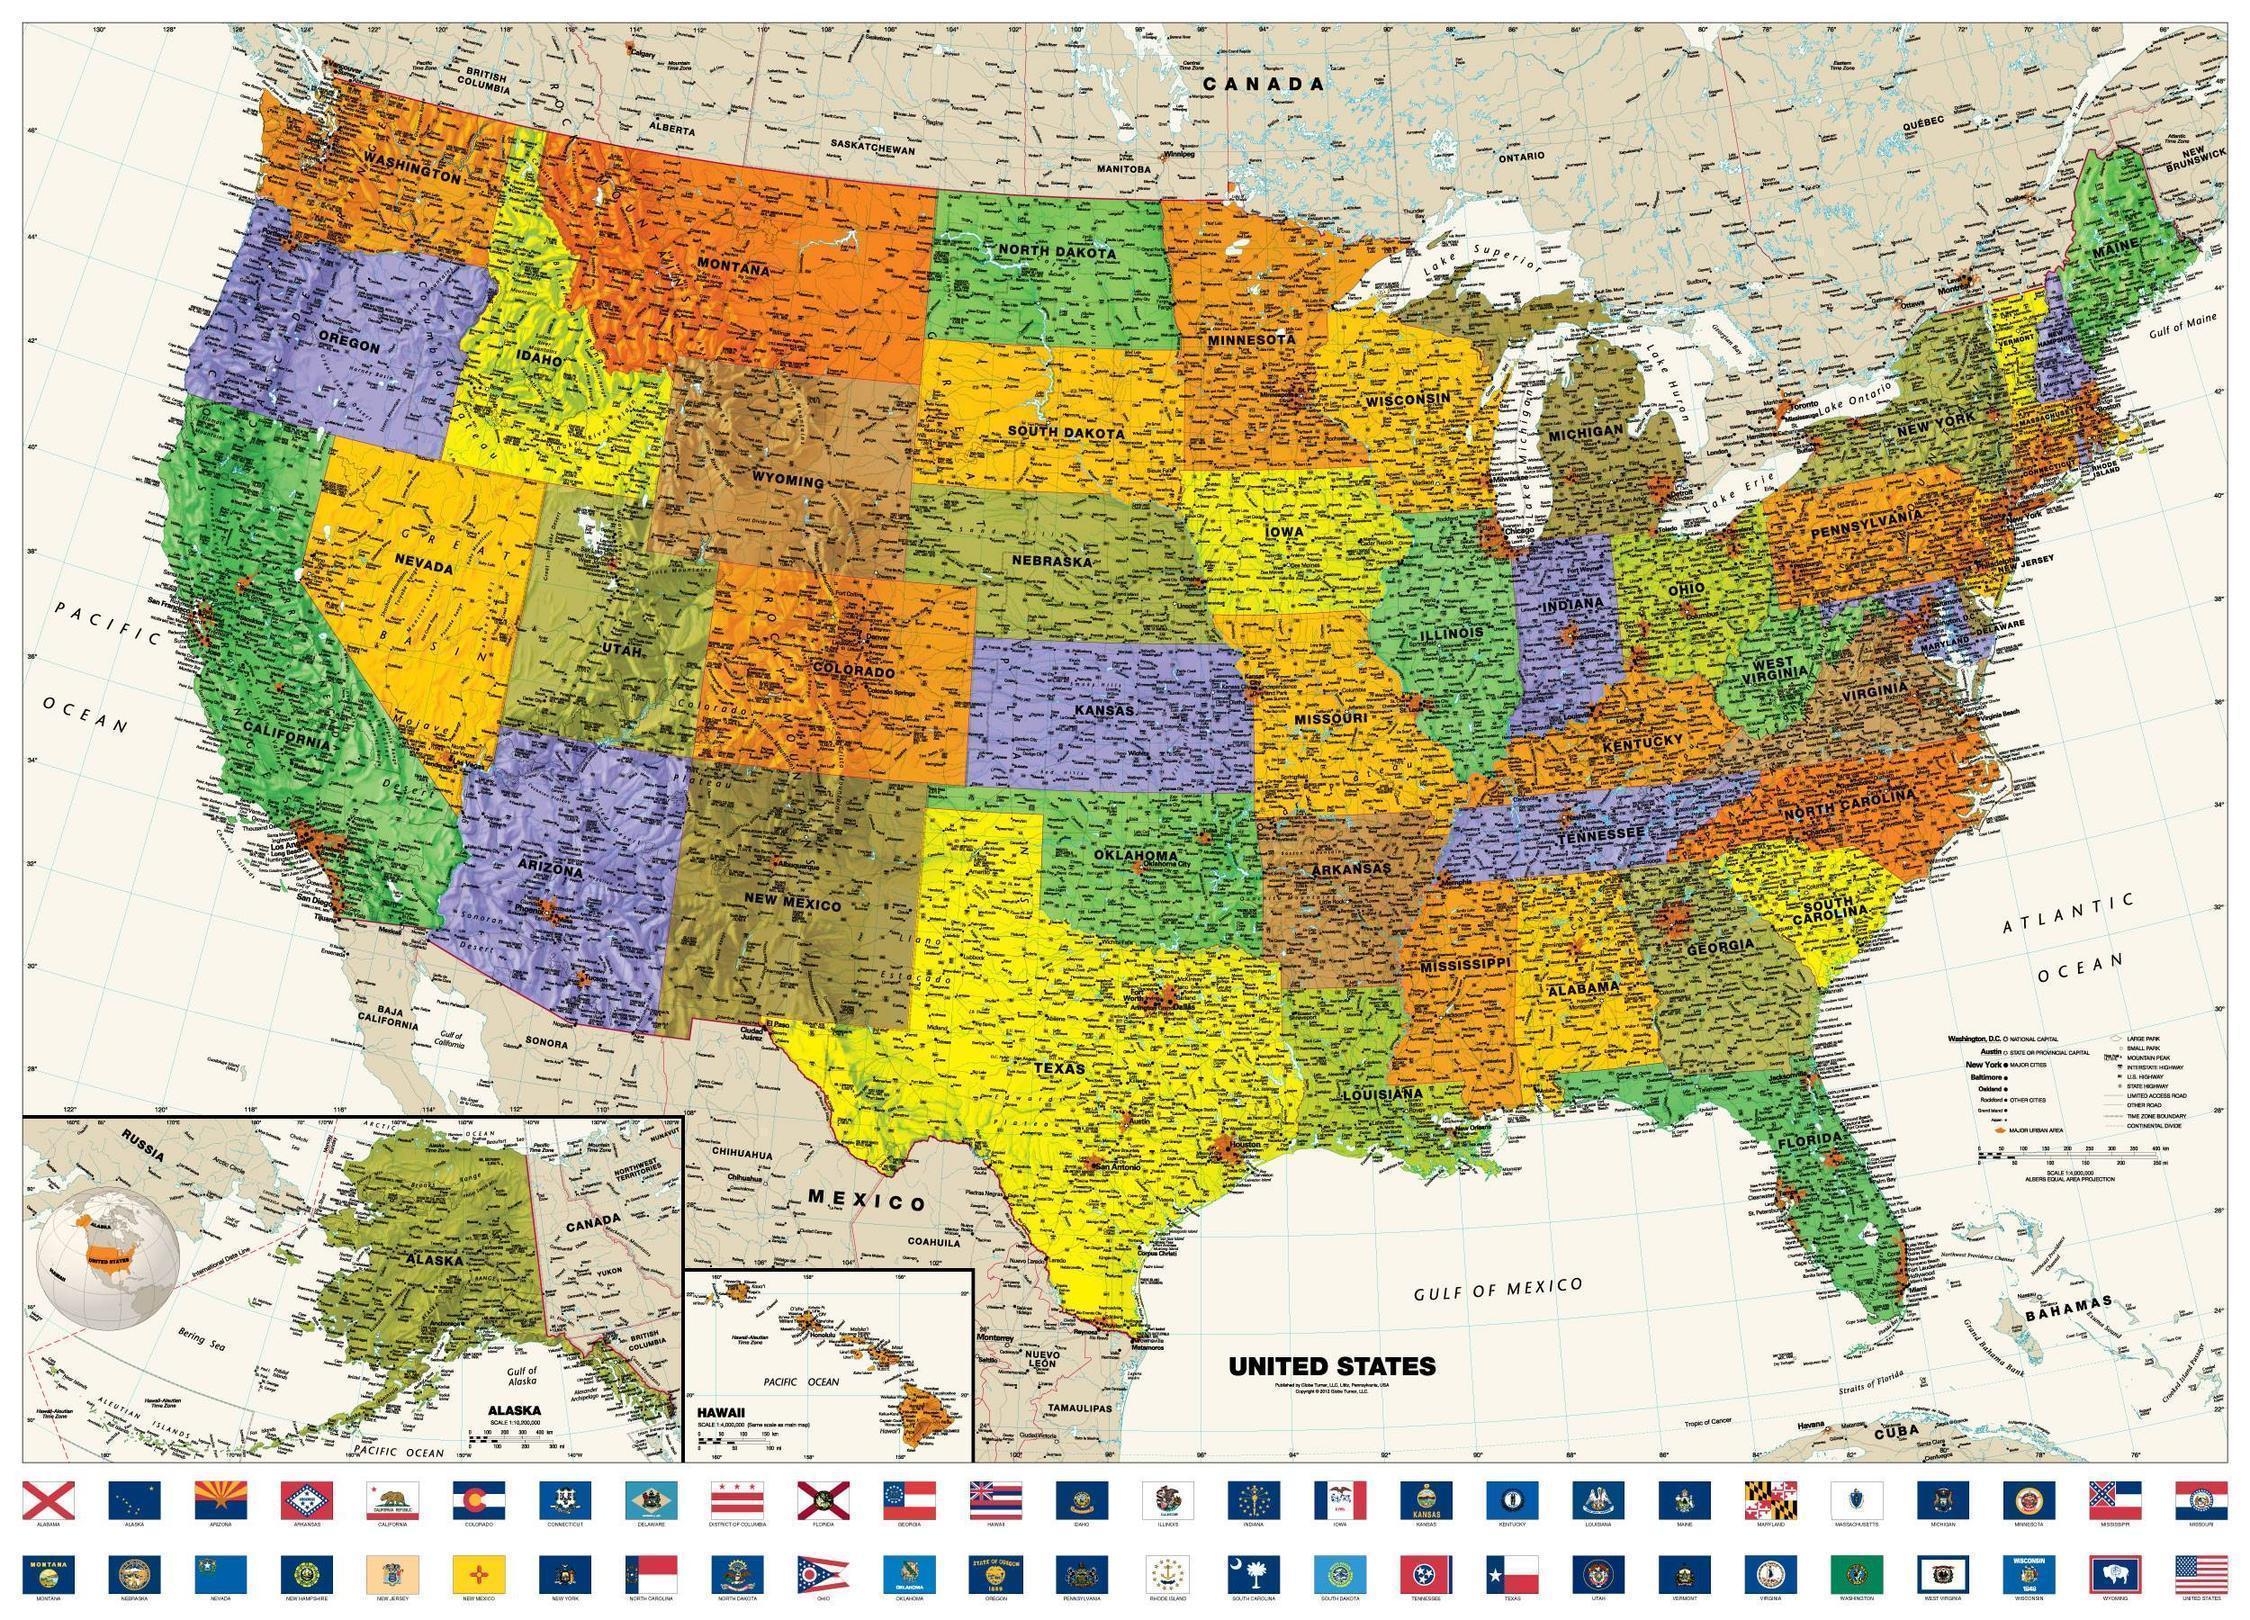 United States Wall Maps